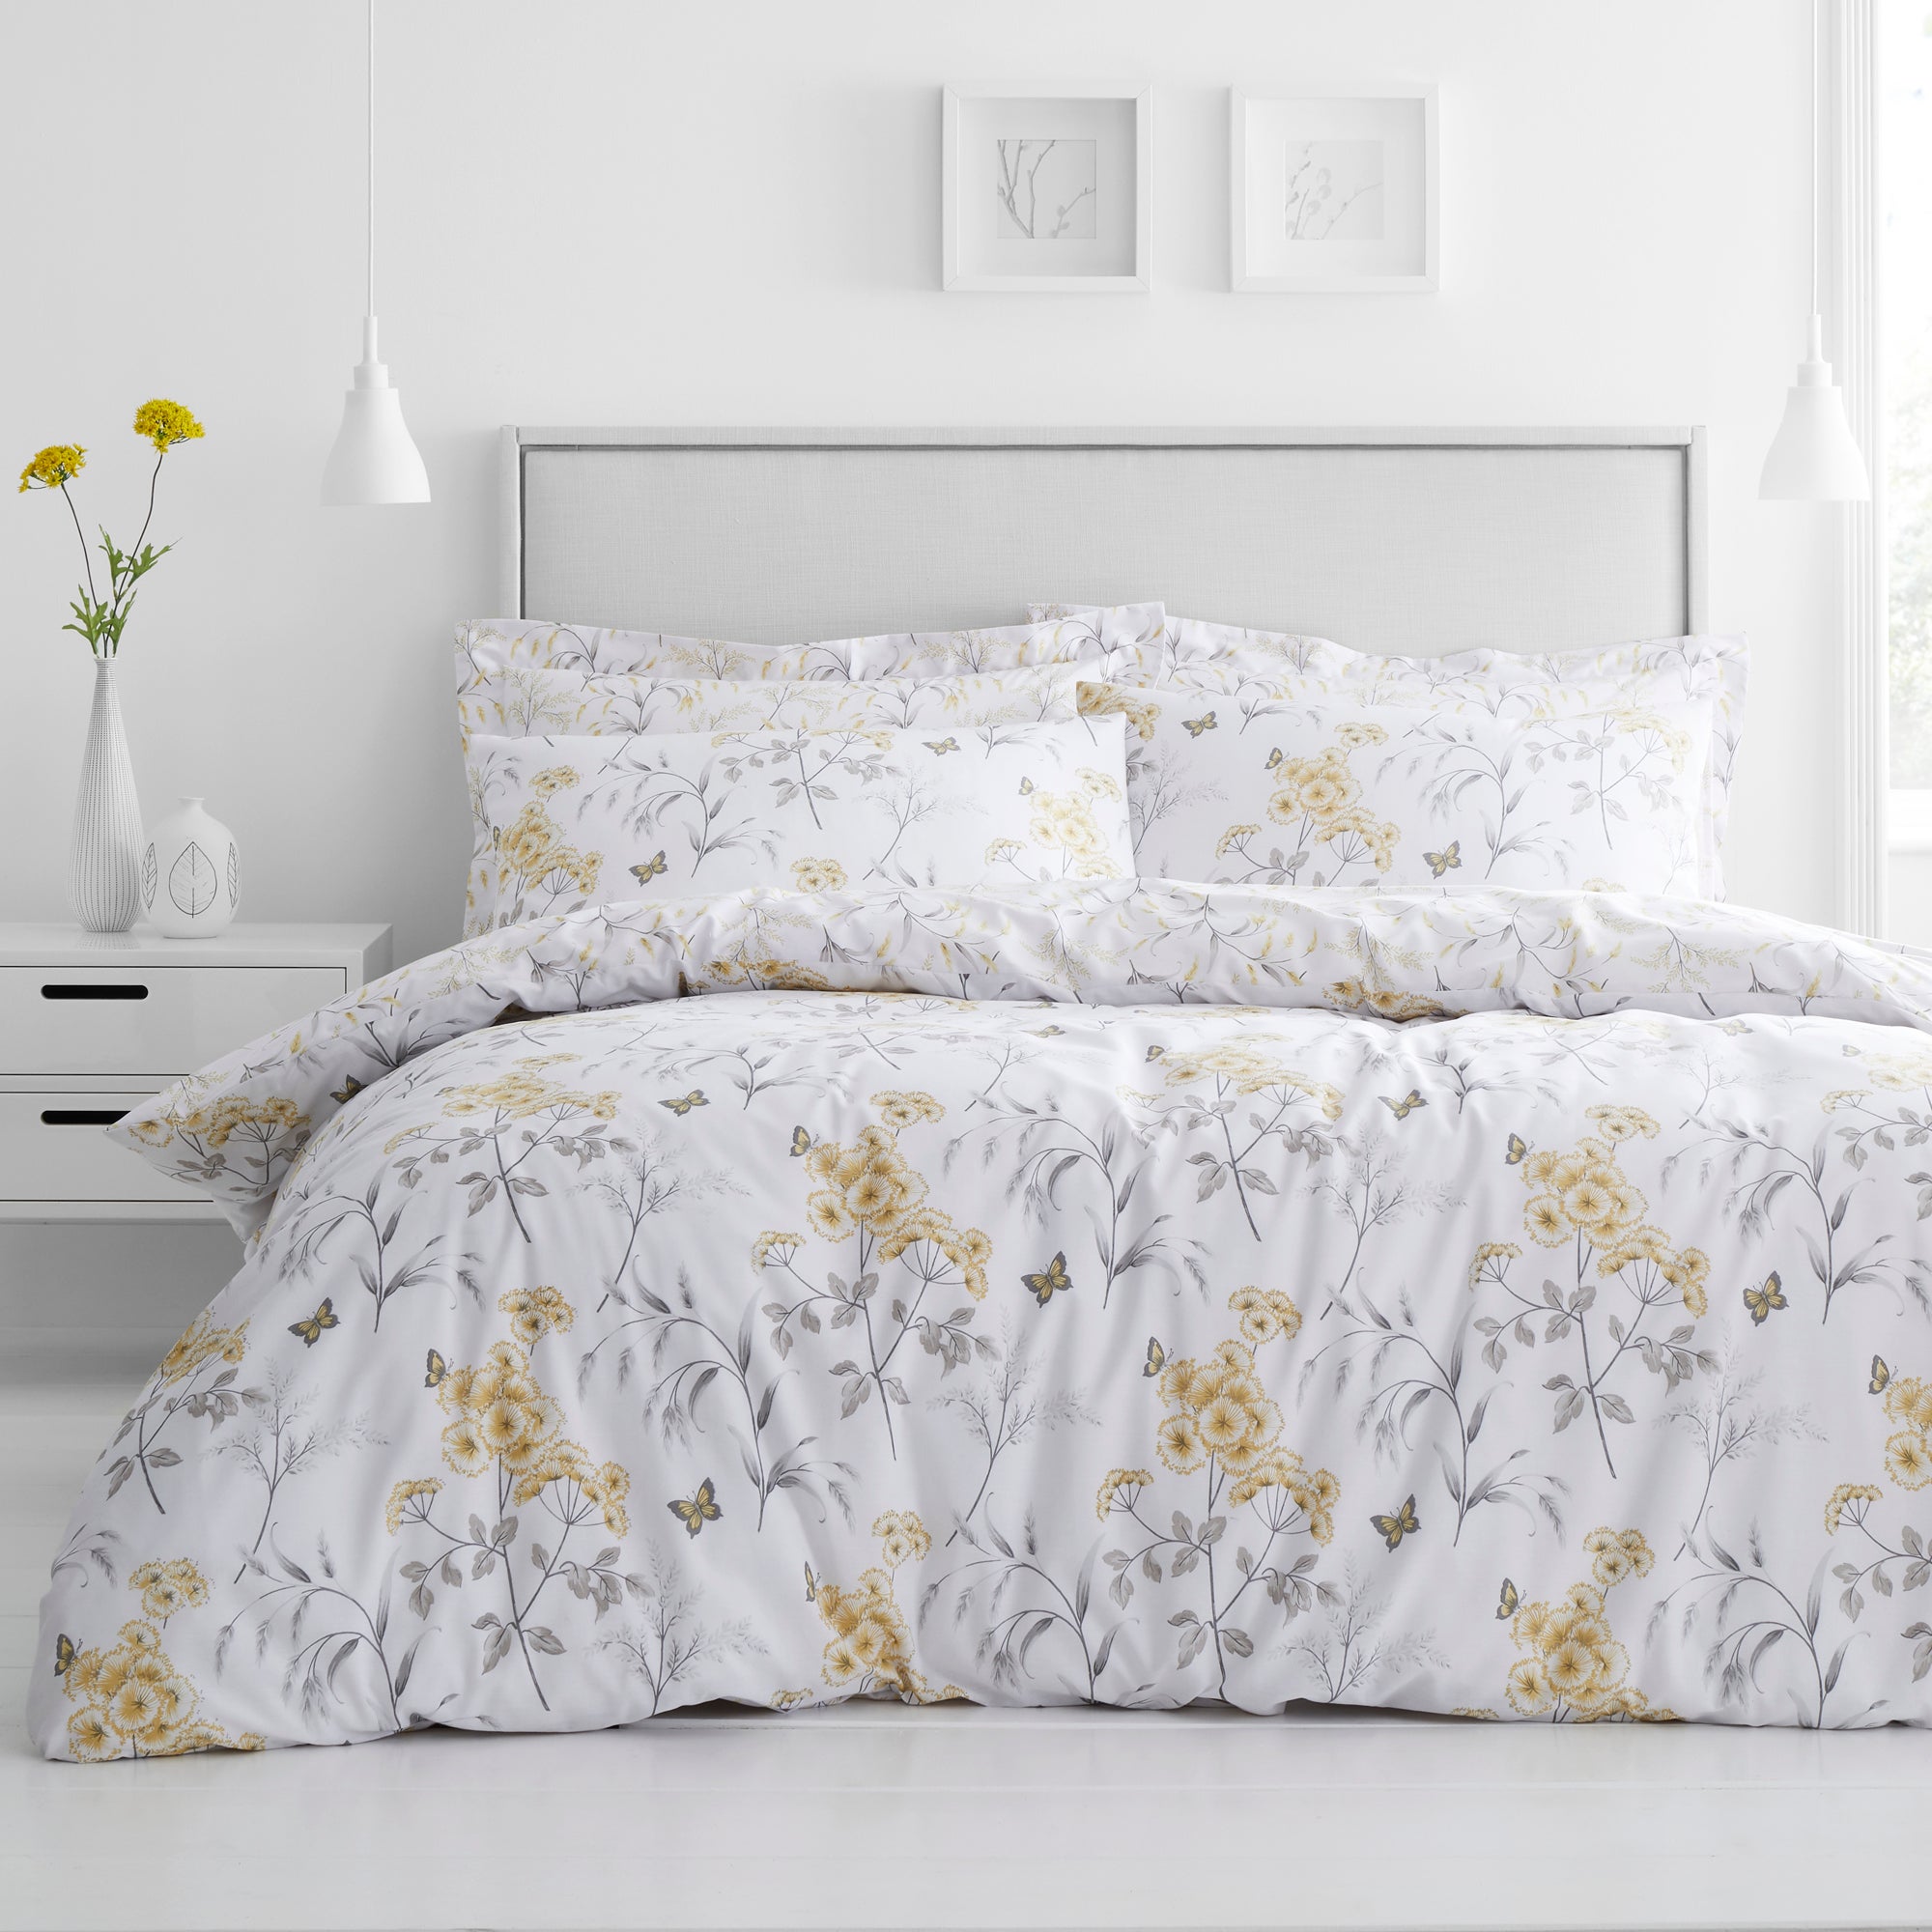 Maria Ochre Reversible Floral Duvet Cover and Pillowcase Set